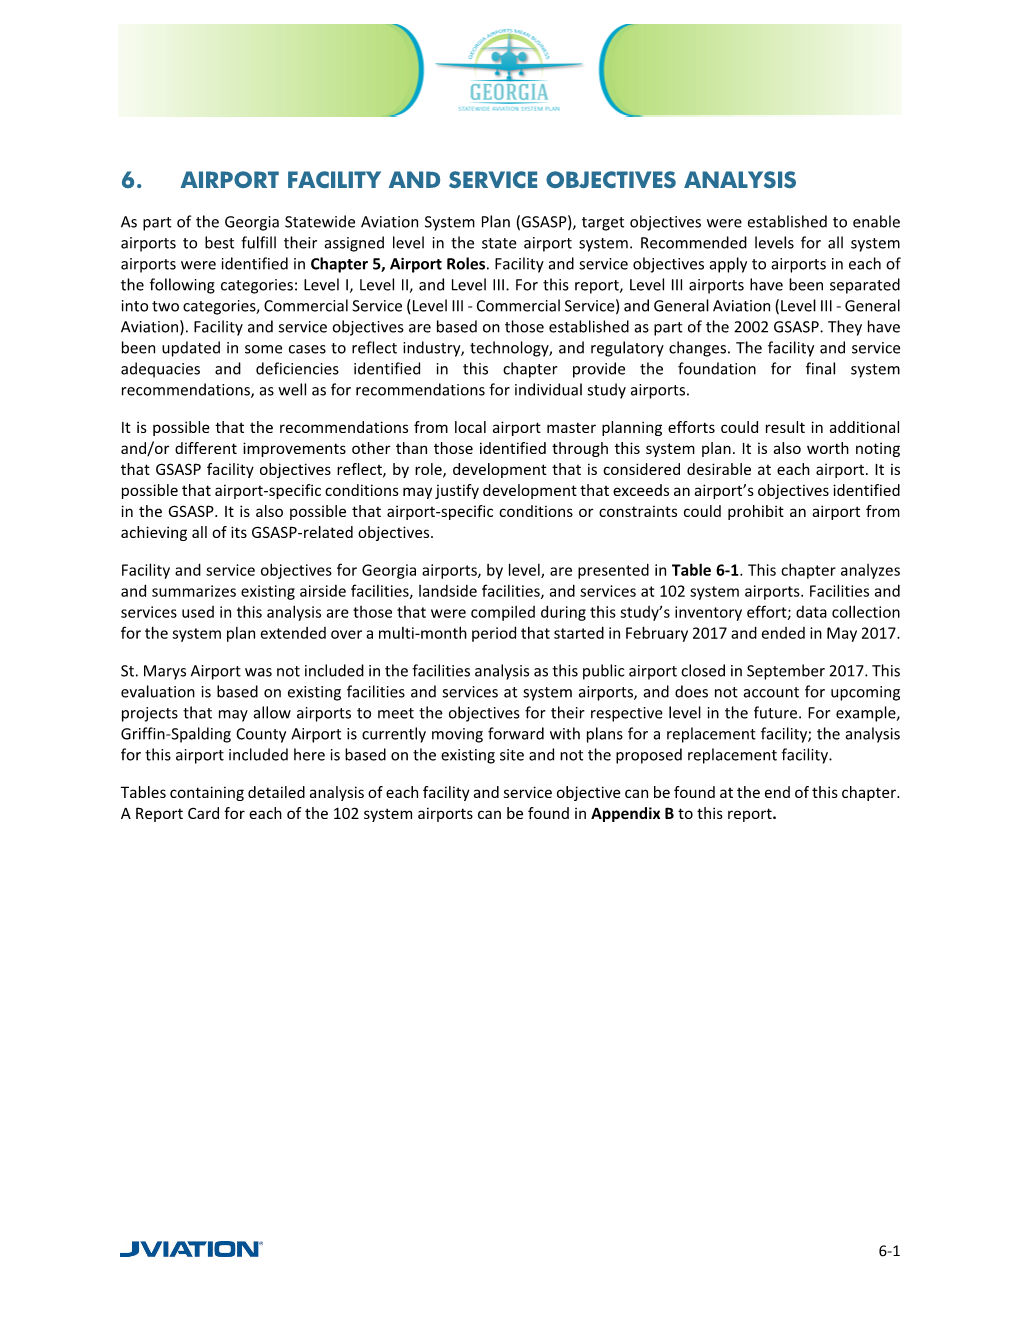 6. Airport Facility and Service Objectives Analysis